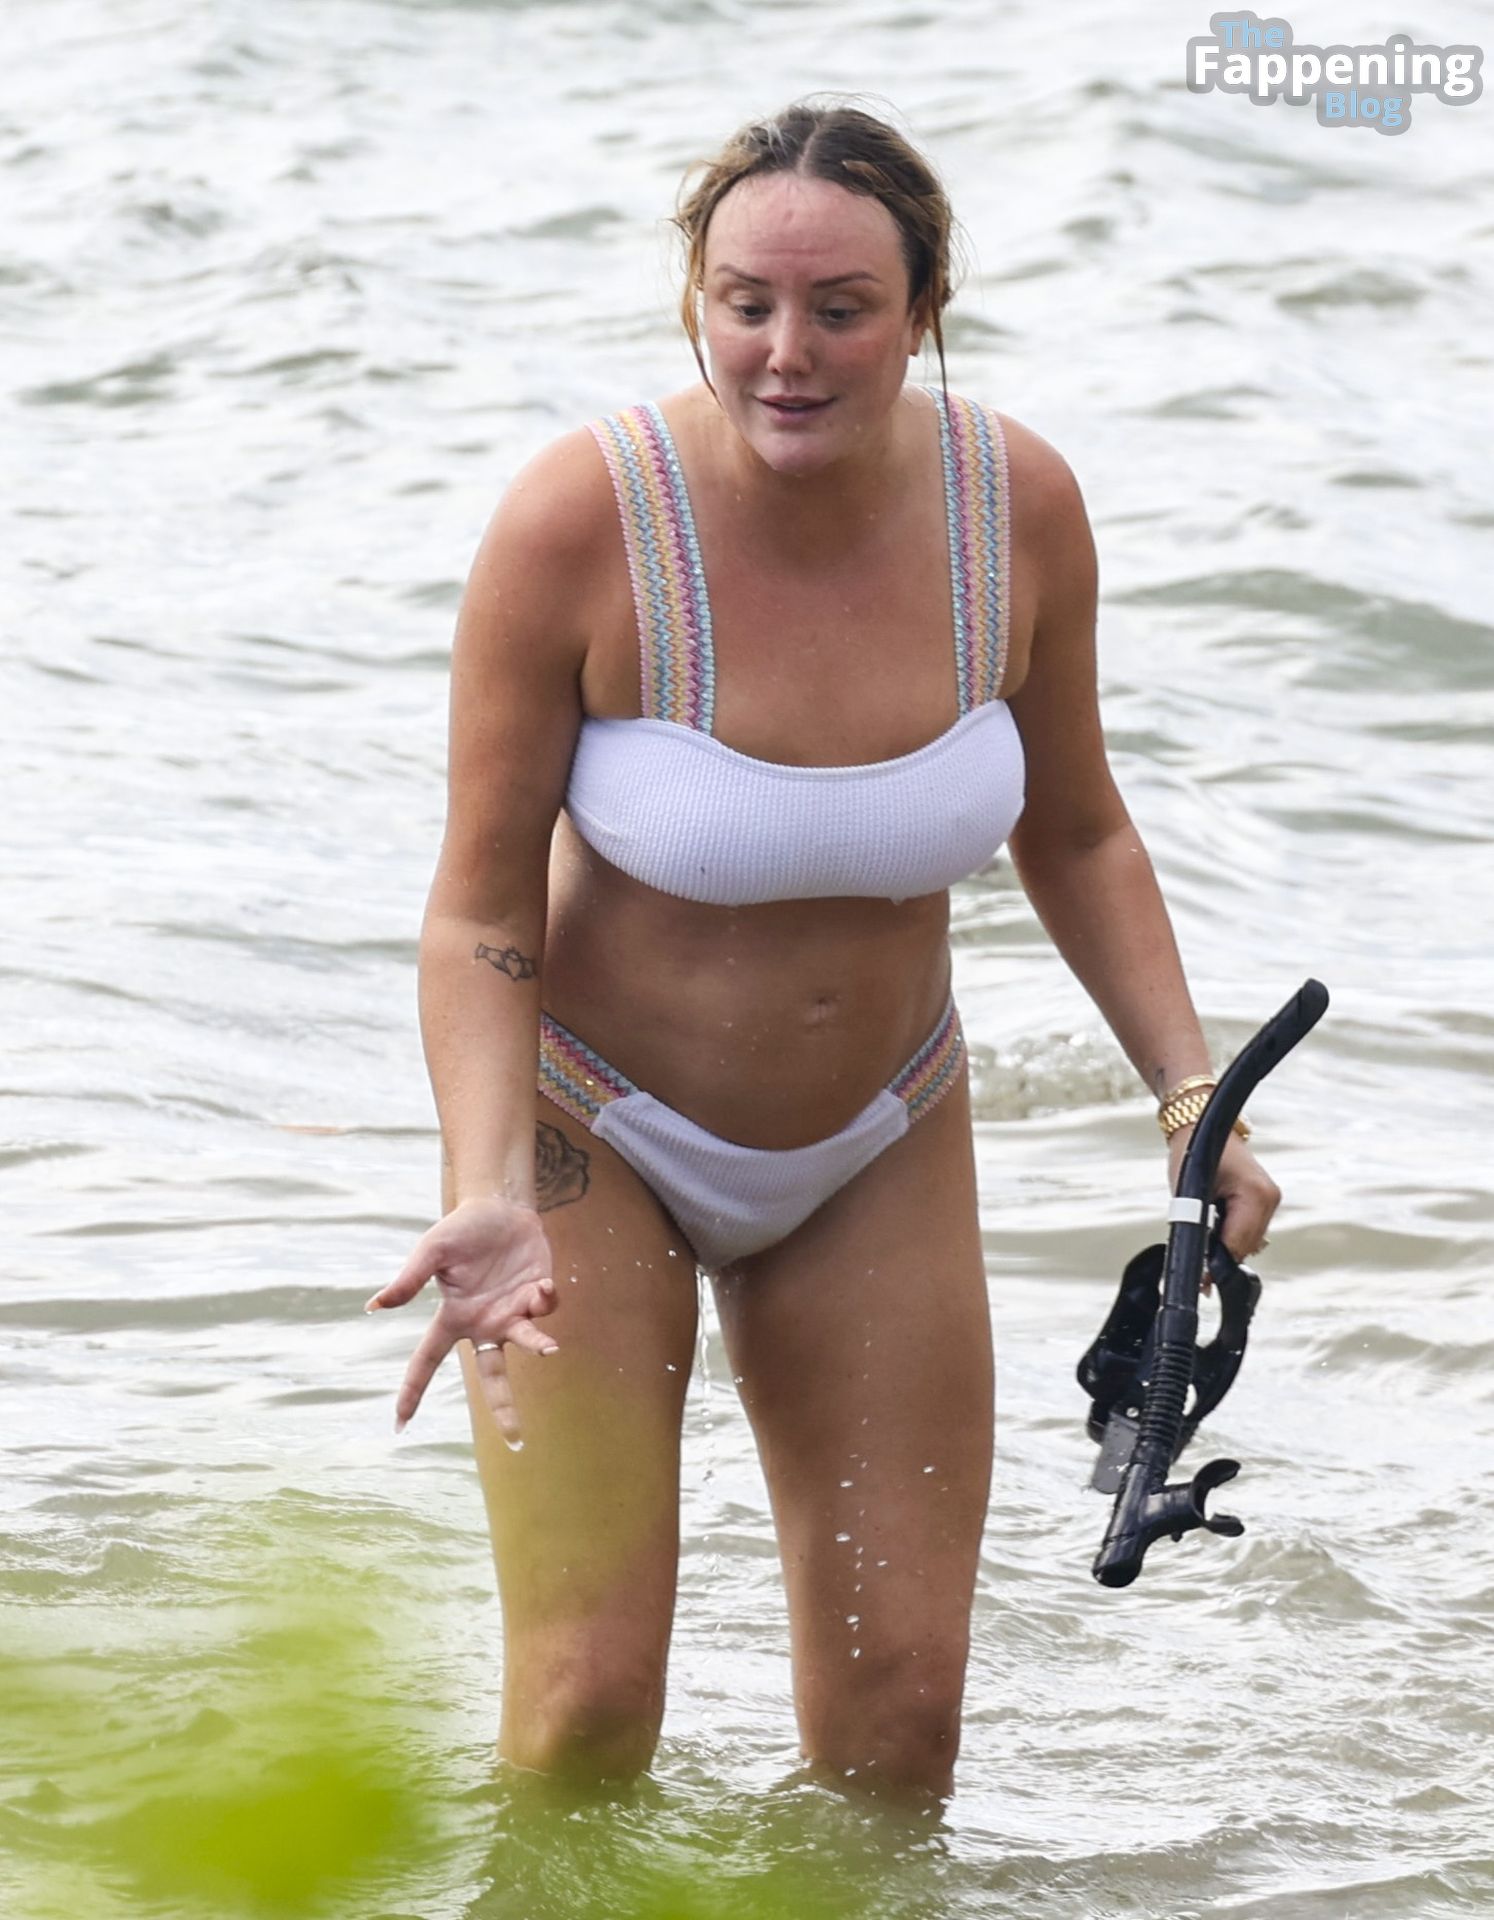 Charlotte-Crosby-Sexy-30-The-Fappening-Blog.jpg